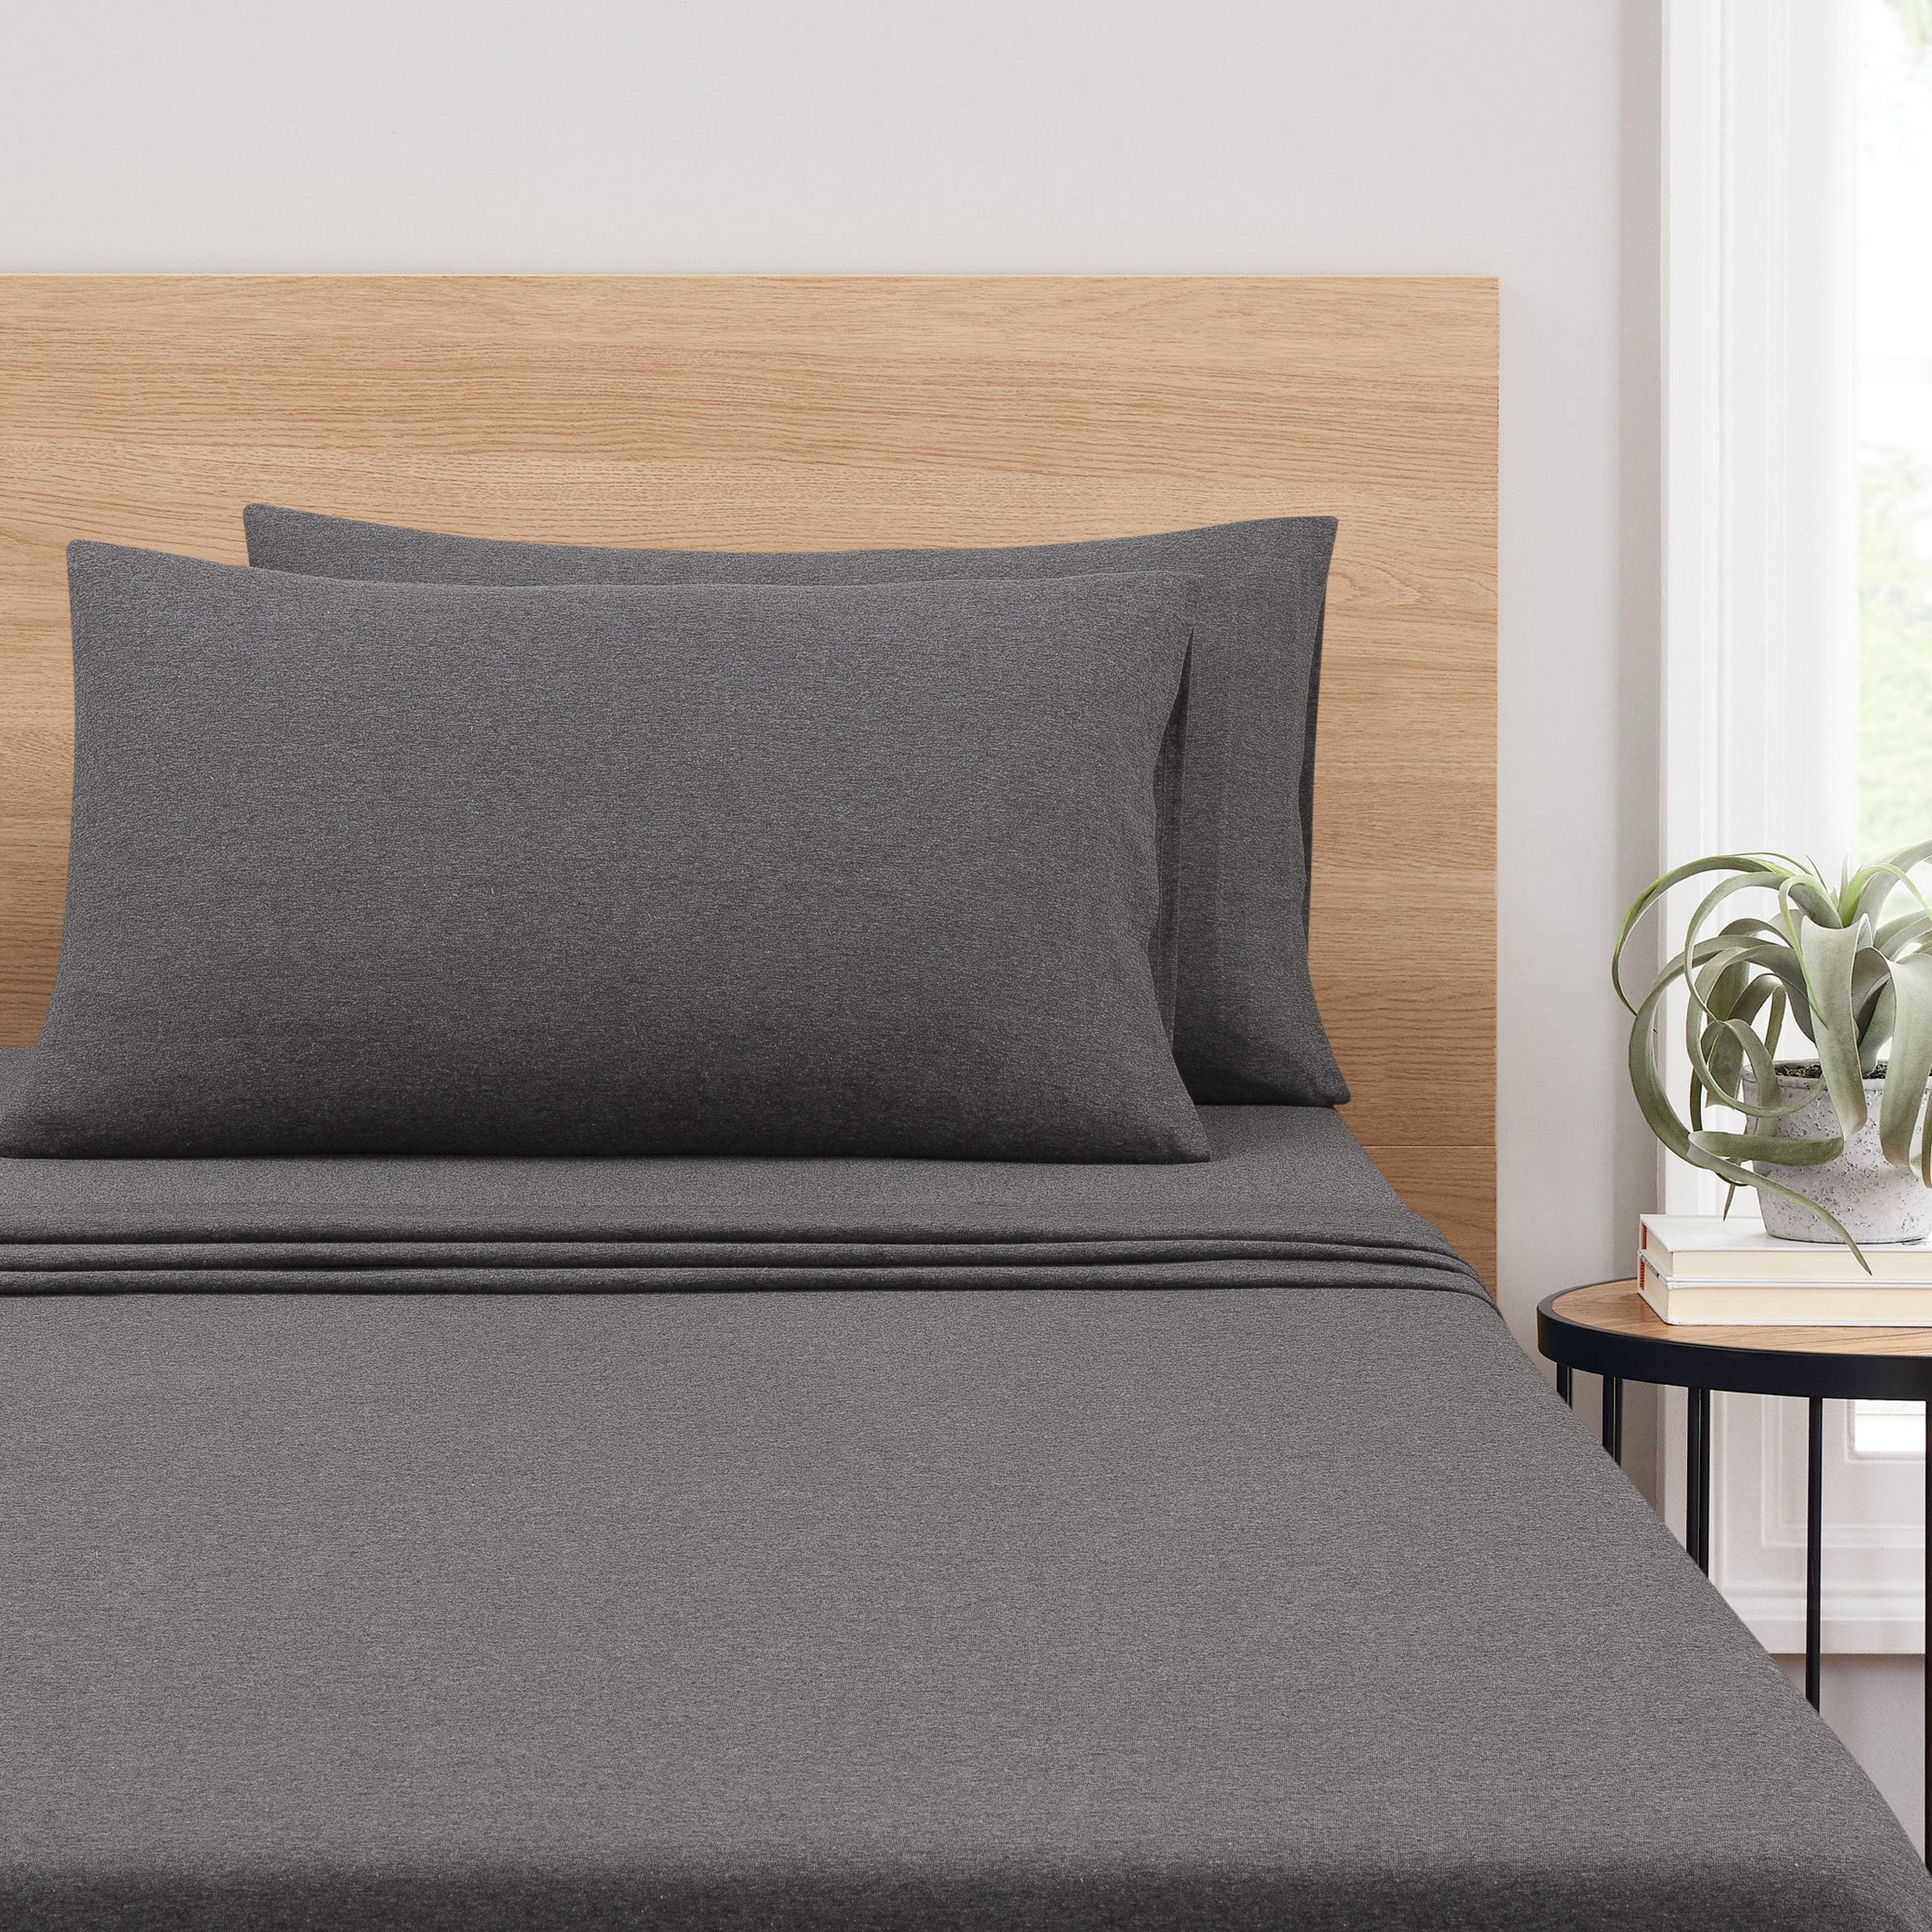 Under The Canopy Organic Flannel Sheet Set - Heathered Grey Heathered Grey / Queen